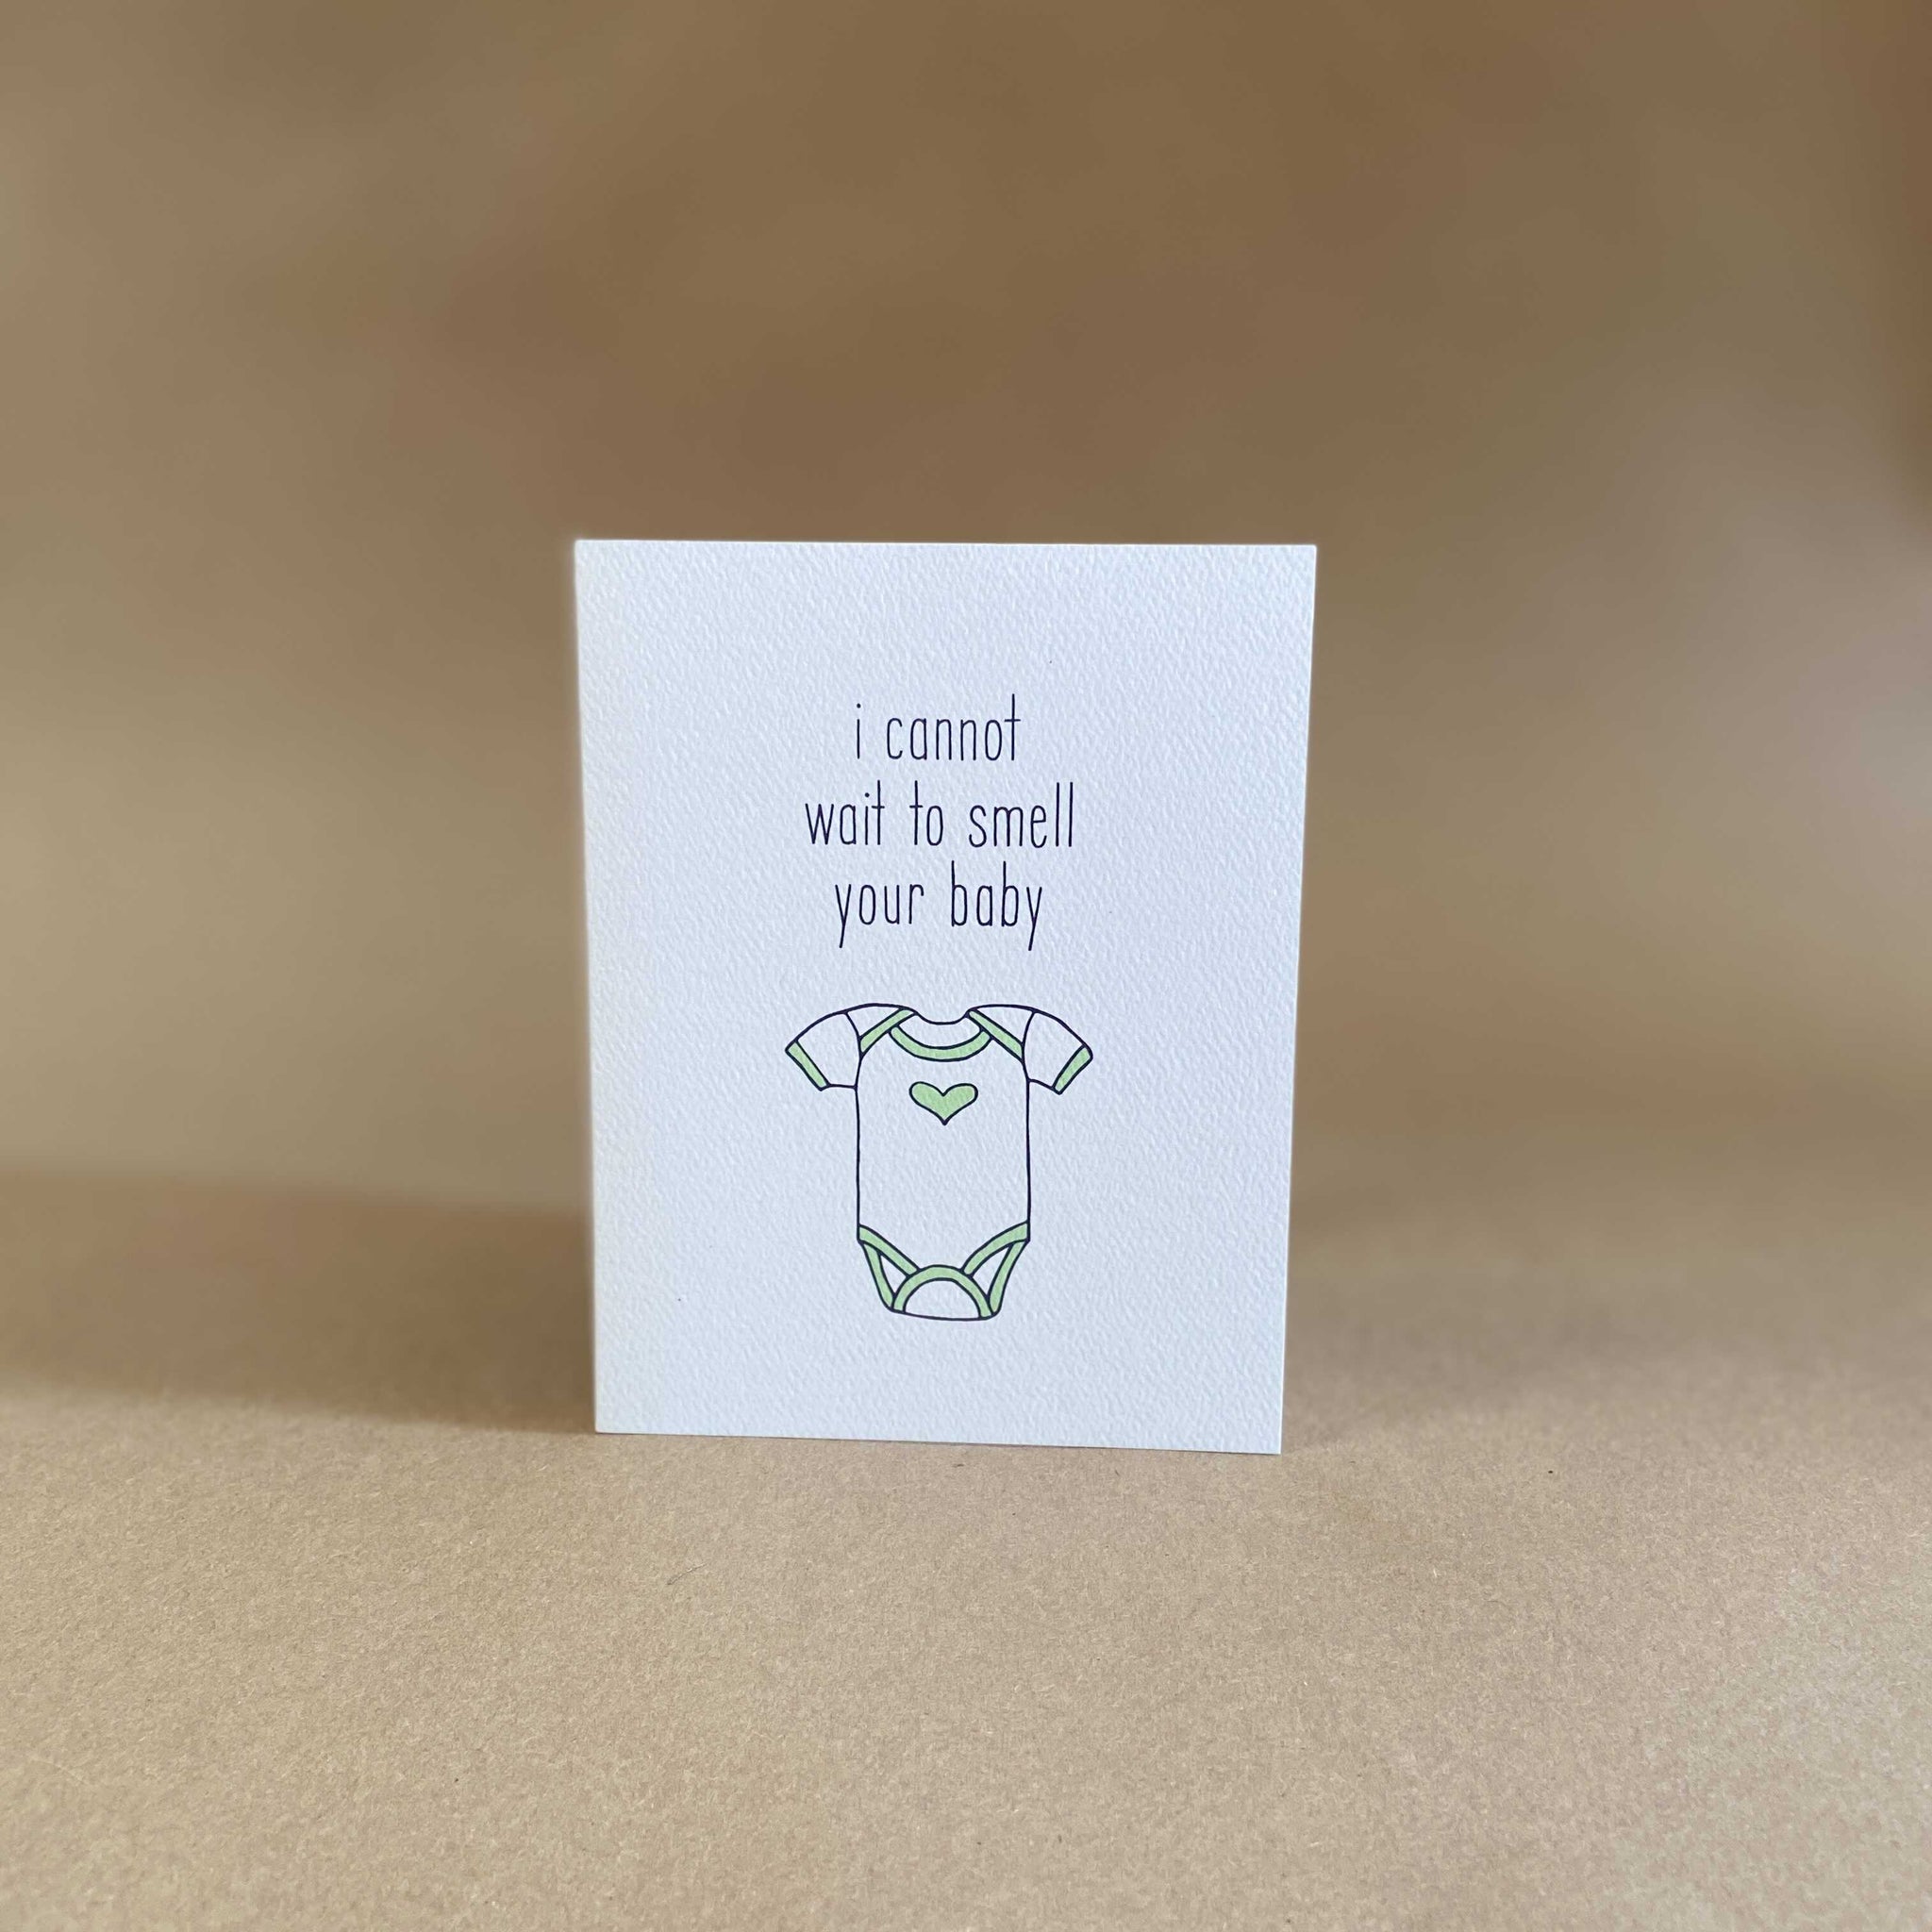 Tiny Hooray Stationery I Cannot Wait to Smell Your Baby Card